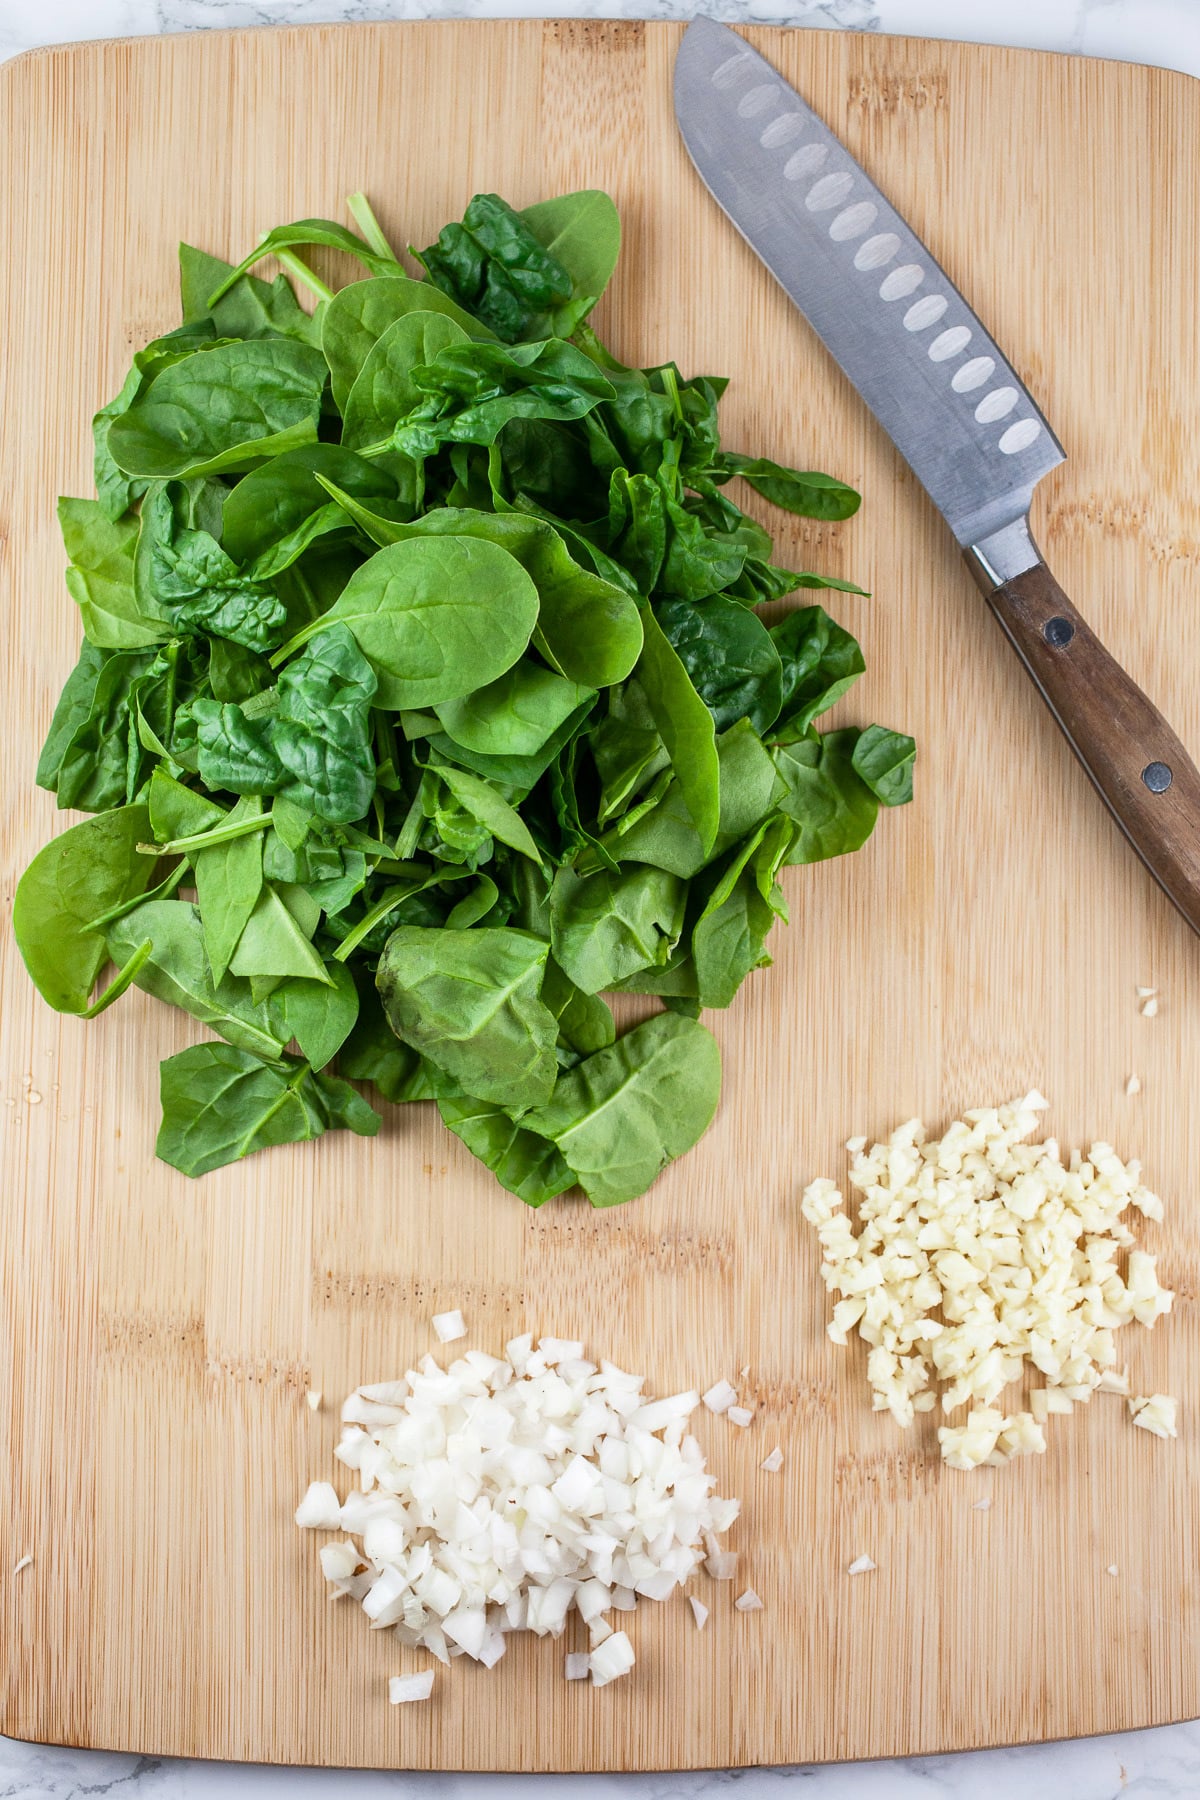 Minced garlic, shallots, and spinach on wooden cutting board with knife.